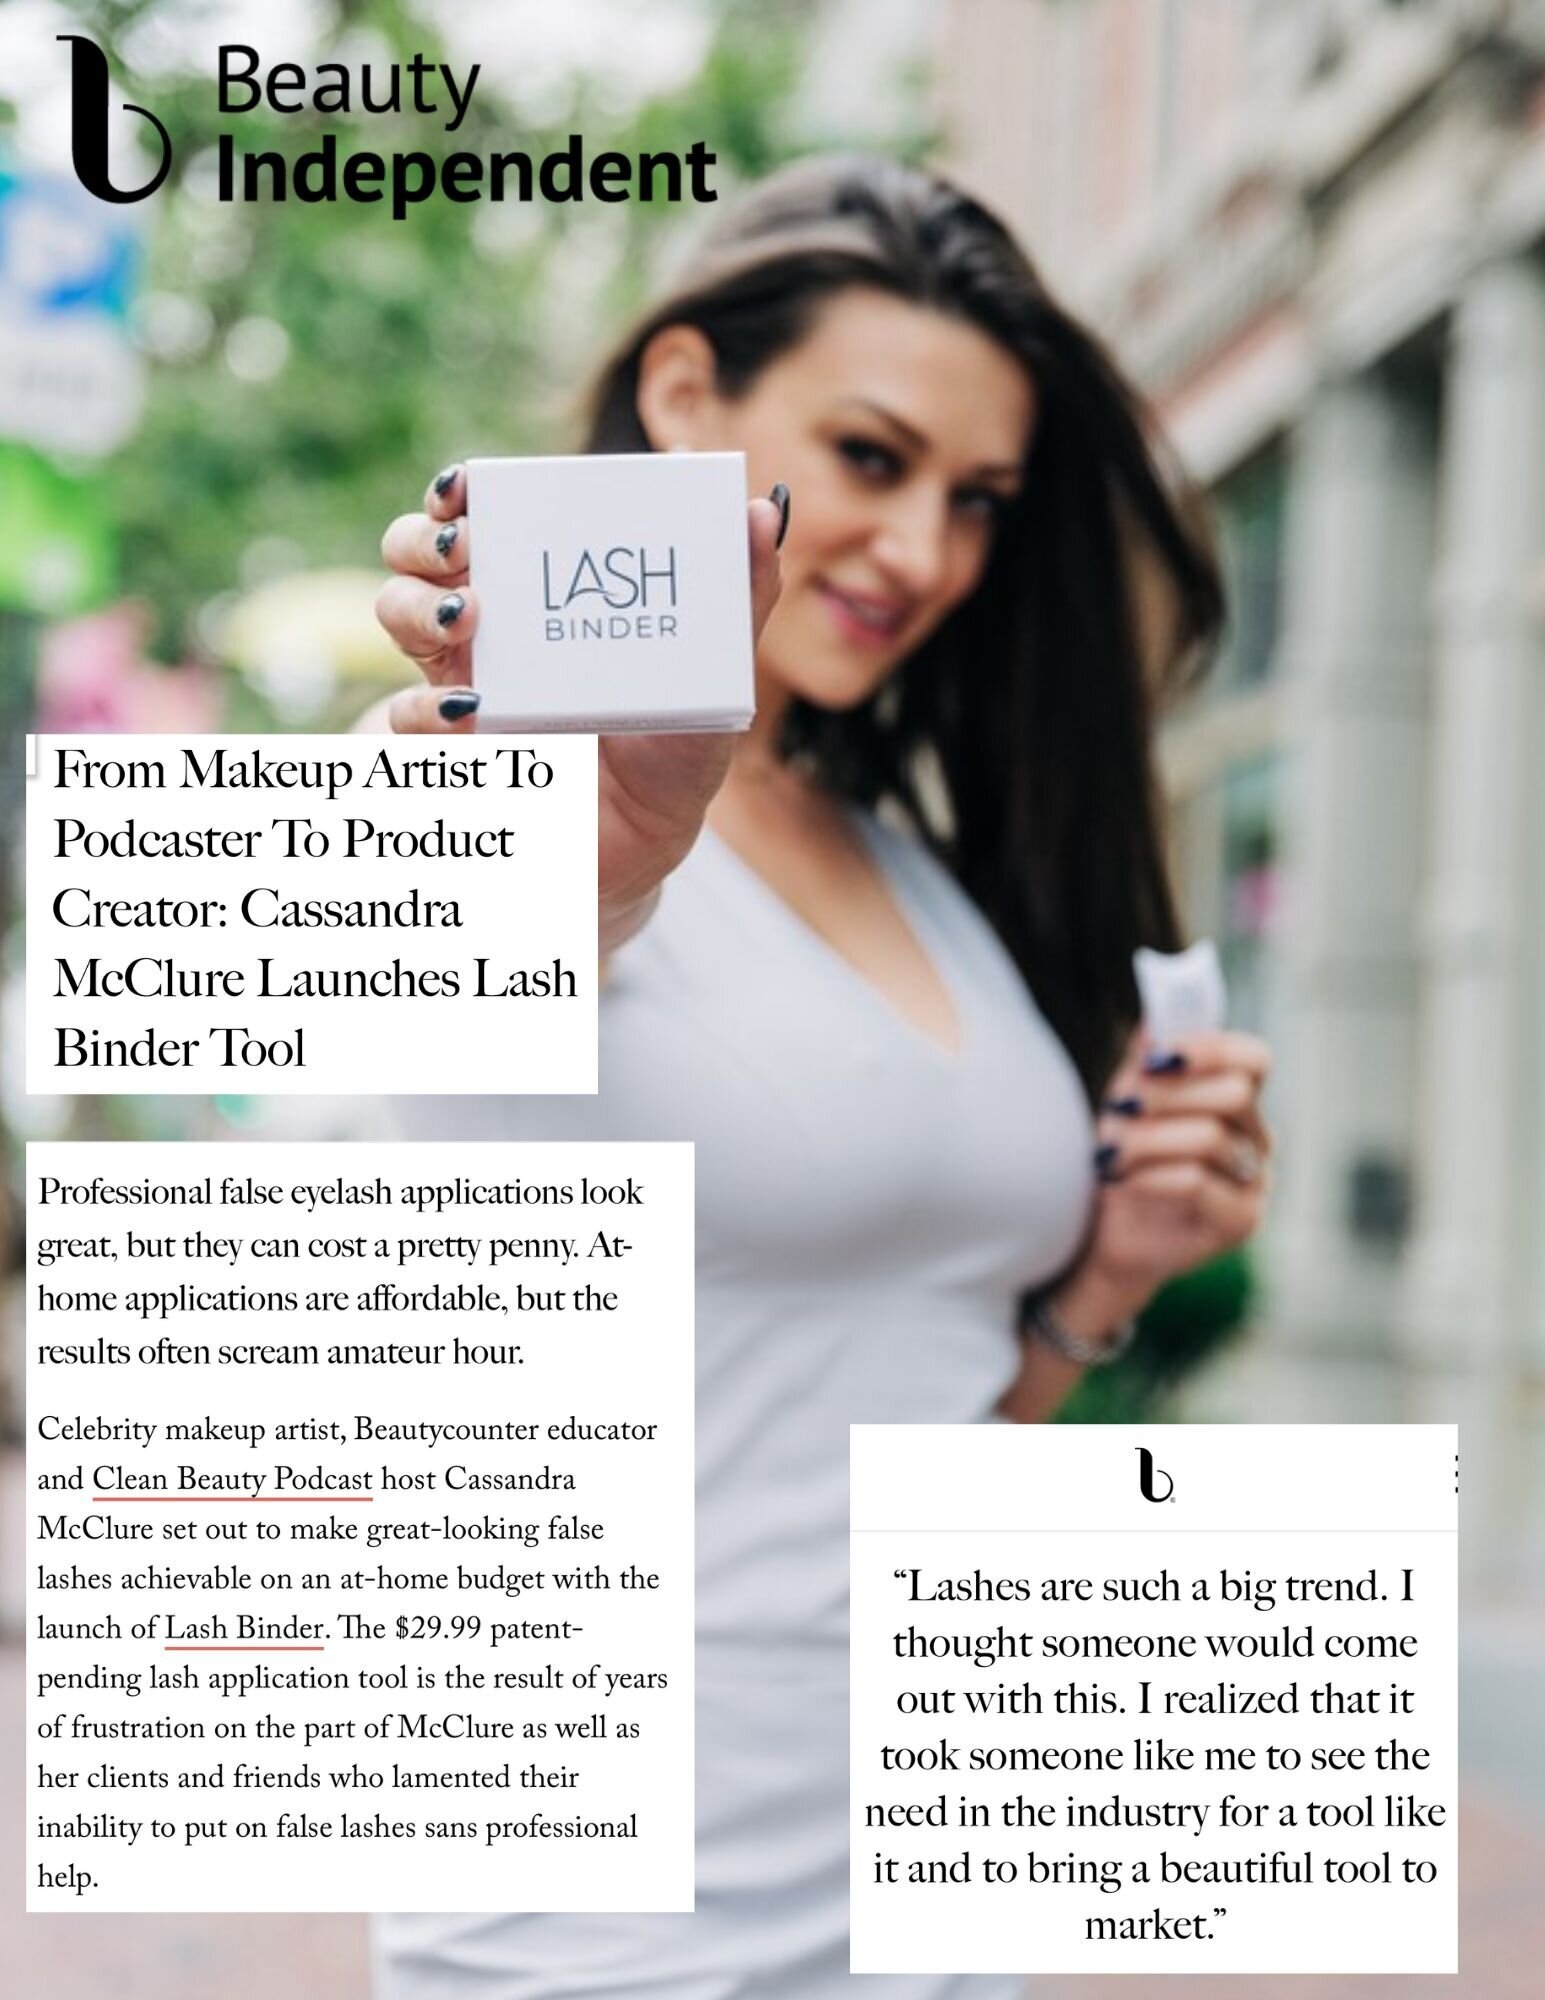 Beauty Independent article featuring Cassandra McClure